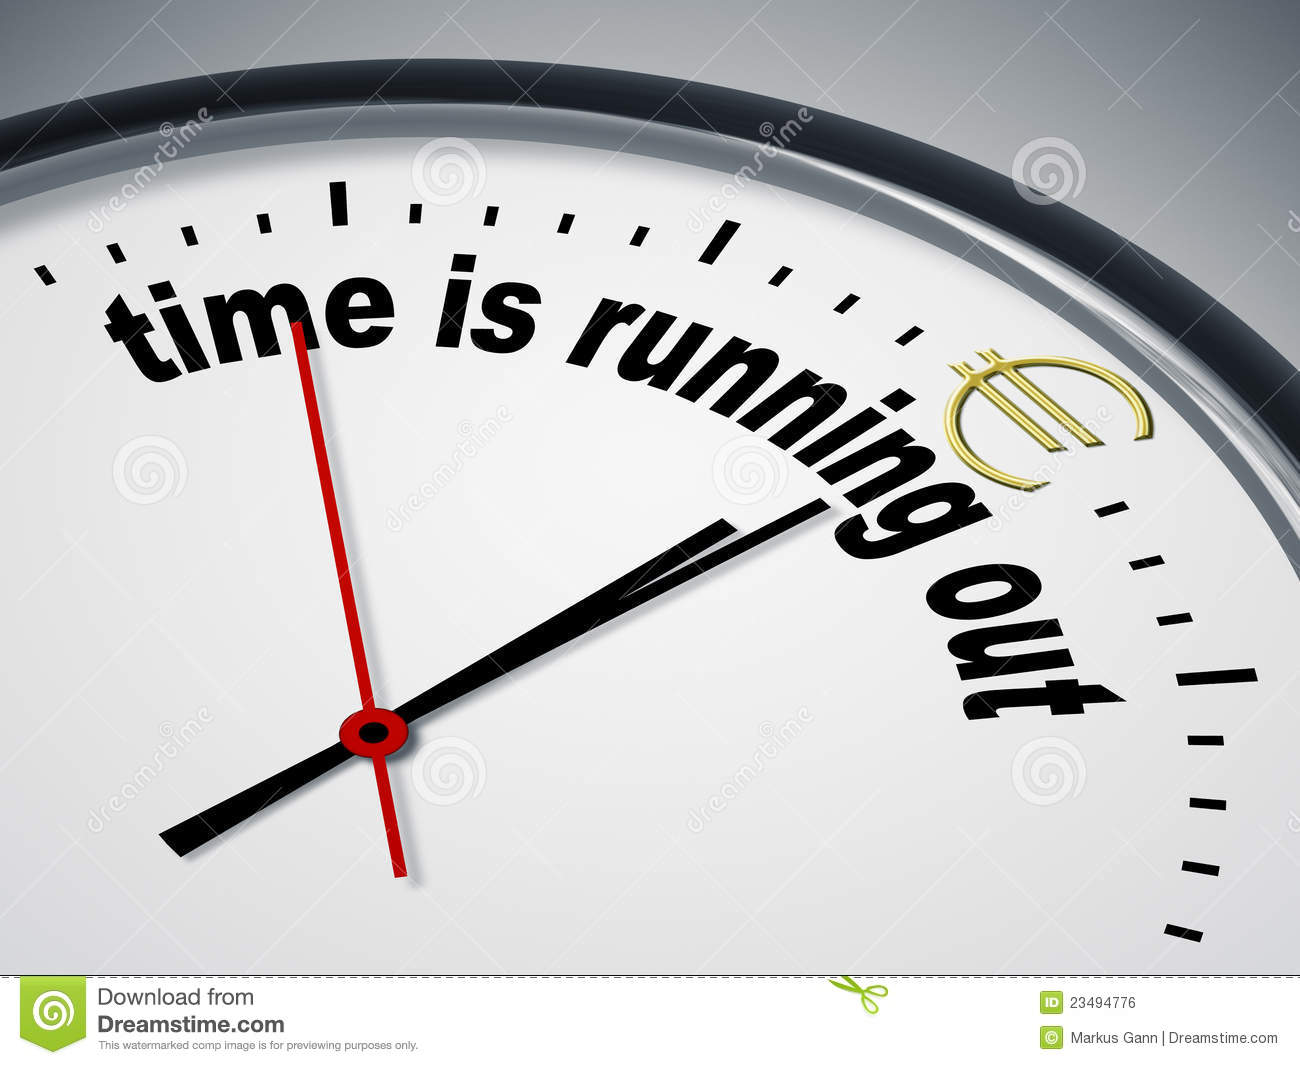 Time Is Running Out For Euro Royalty Free Stock Image   Image    